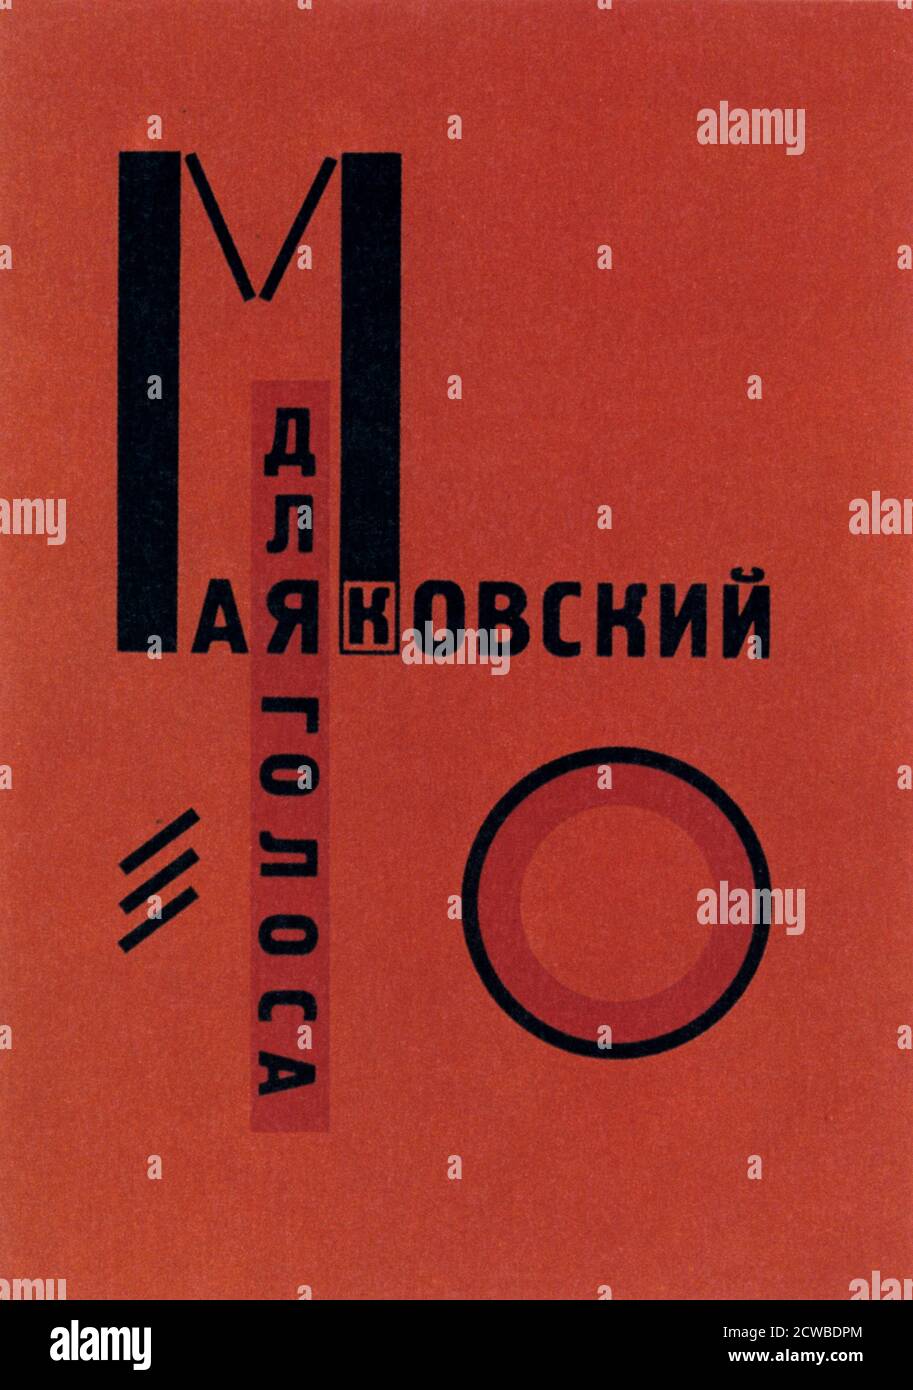 El Lissitzky & Vladimir Mayakovski - Dlia Golosa (For the Voice), design incorporating the geometry and limited colour palette of Supremacism and the multidimensionality of the Proun images. Berlin, 1923. Stock Photo